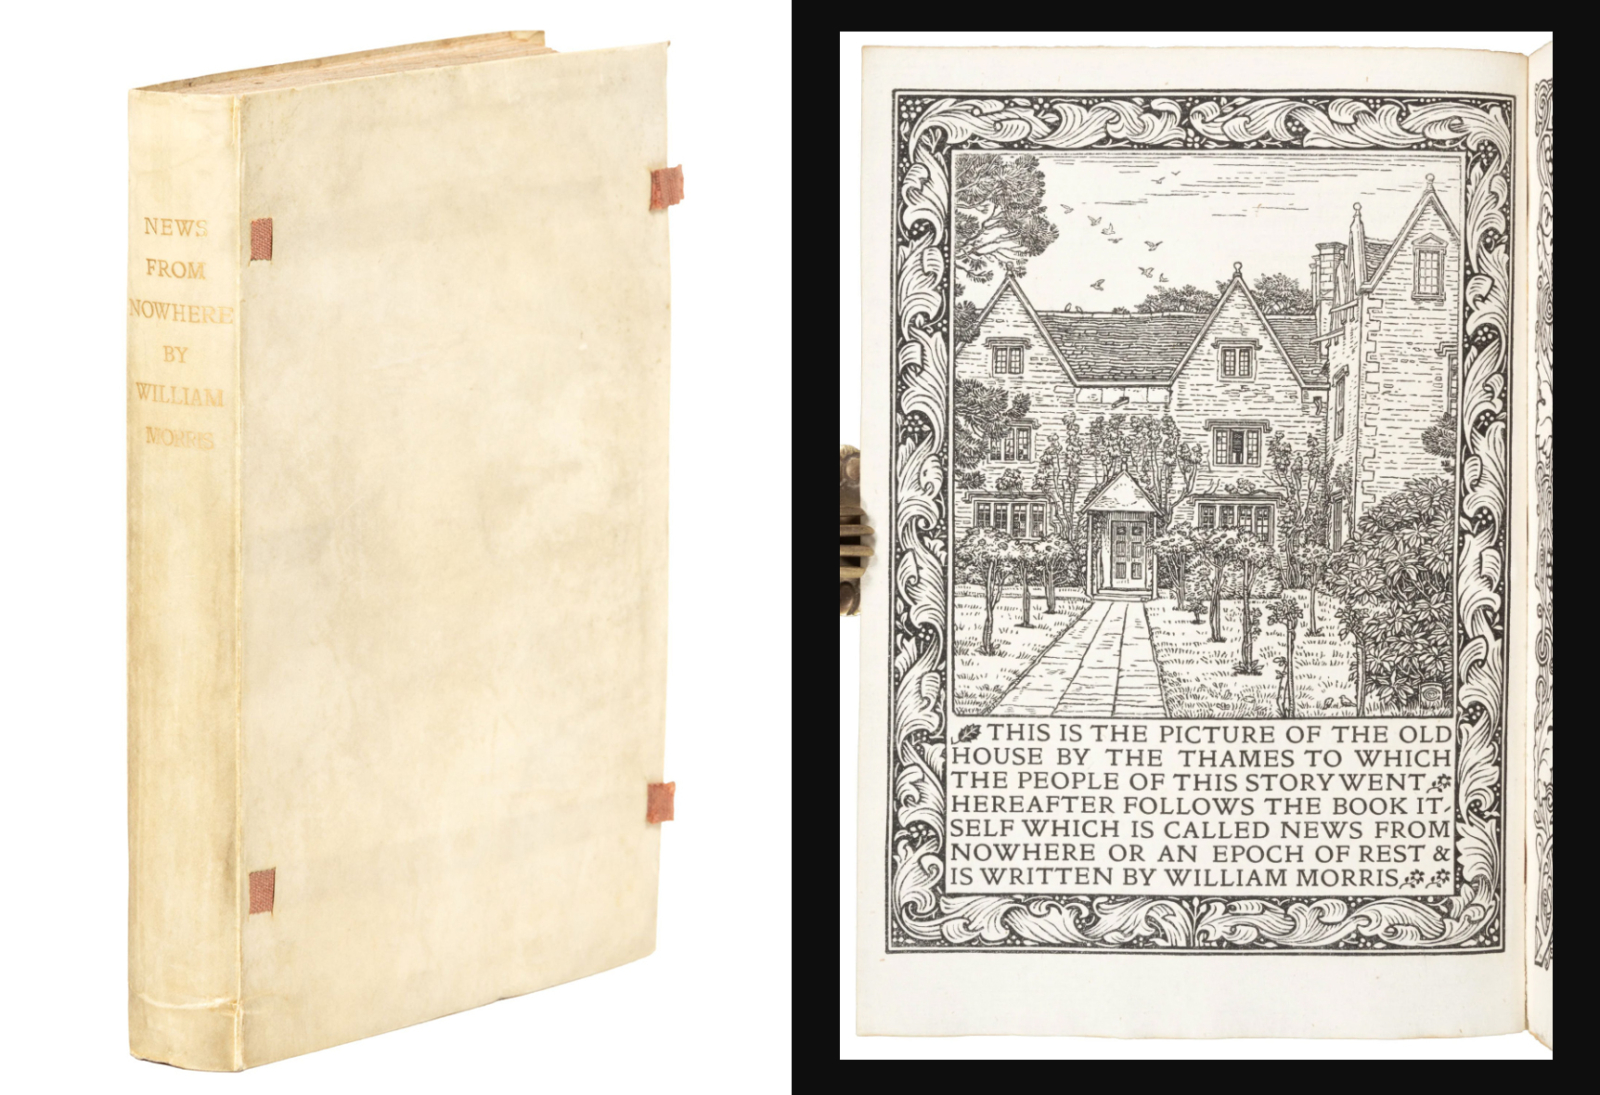 Thomas B. Mosher’s copy of the Morris-written News from Nowhere..., published by Kelmscott Press, earned $9,500 plus the buyer’s premium in September 2023. Image courtesy of PBA Galleries and LiveAuctioneers.